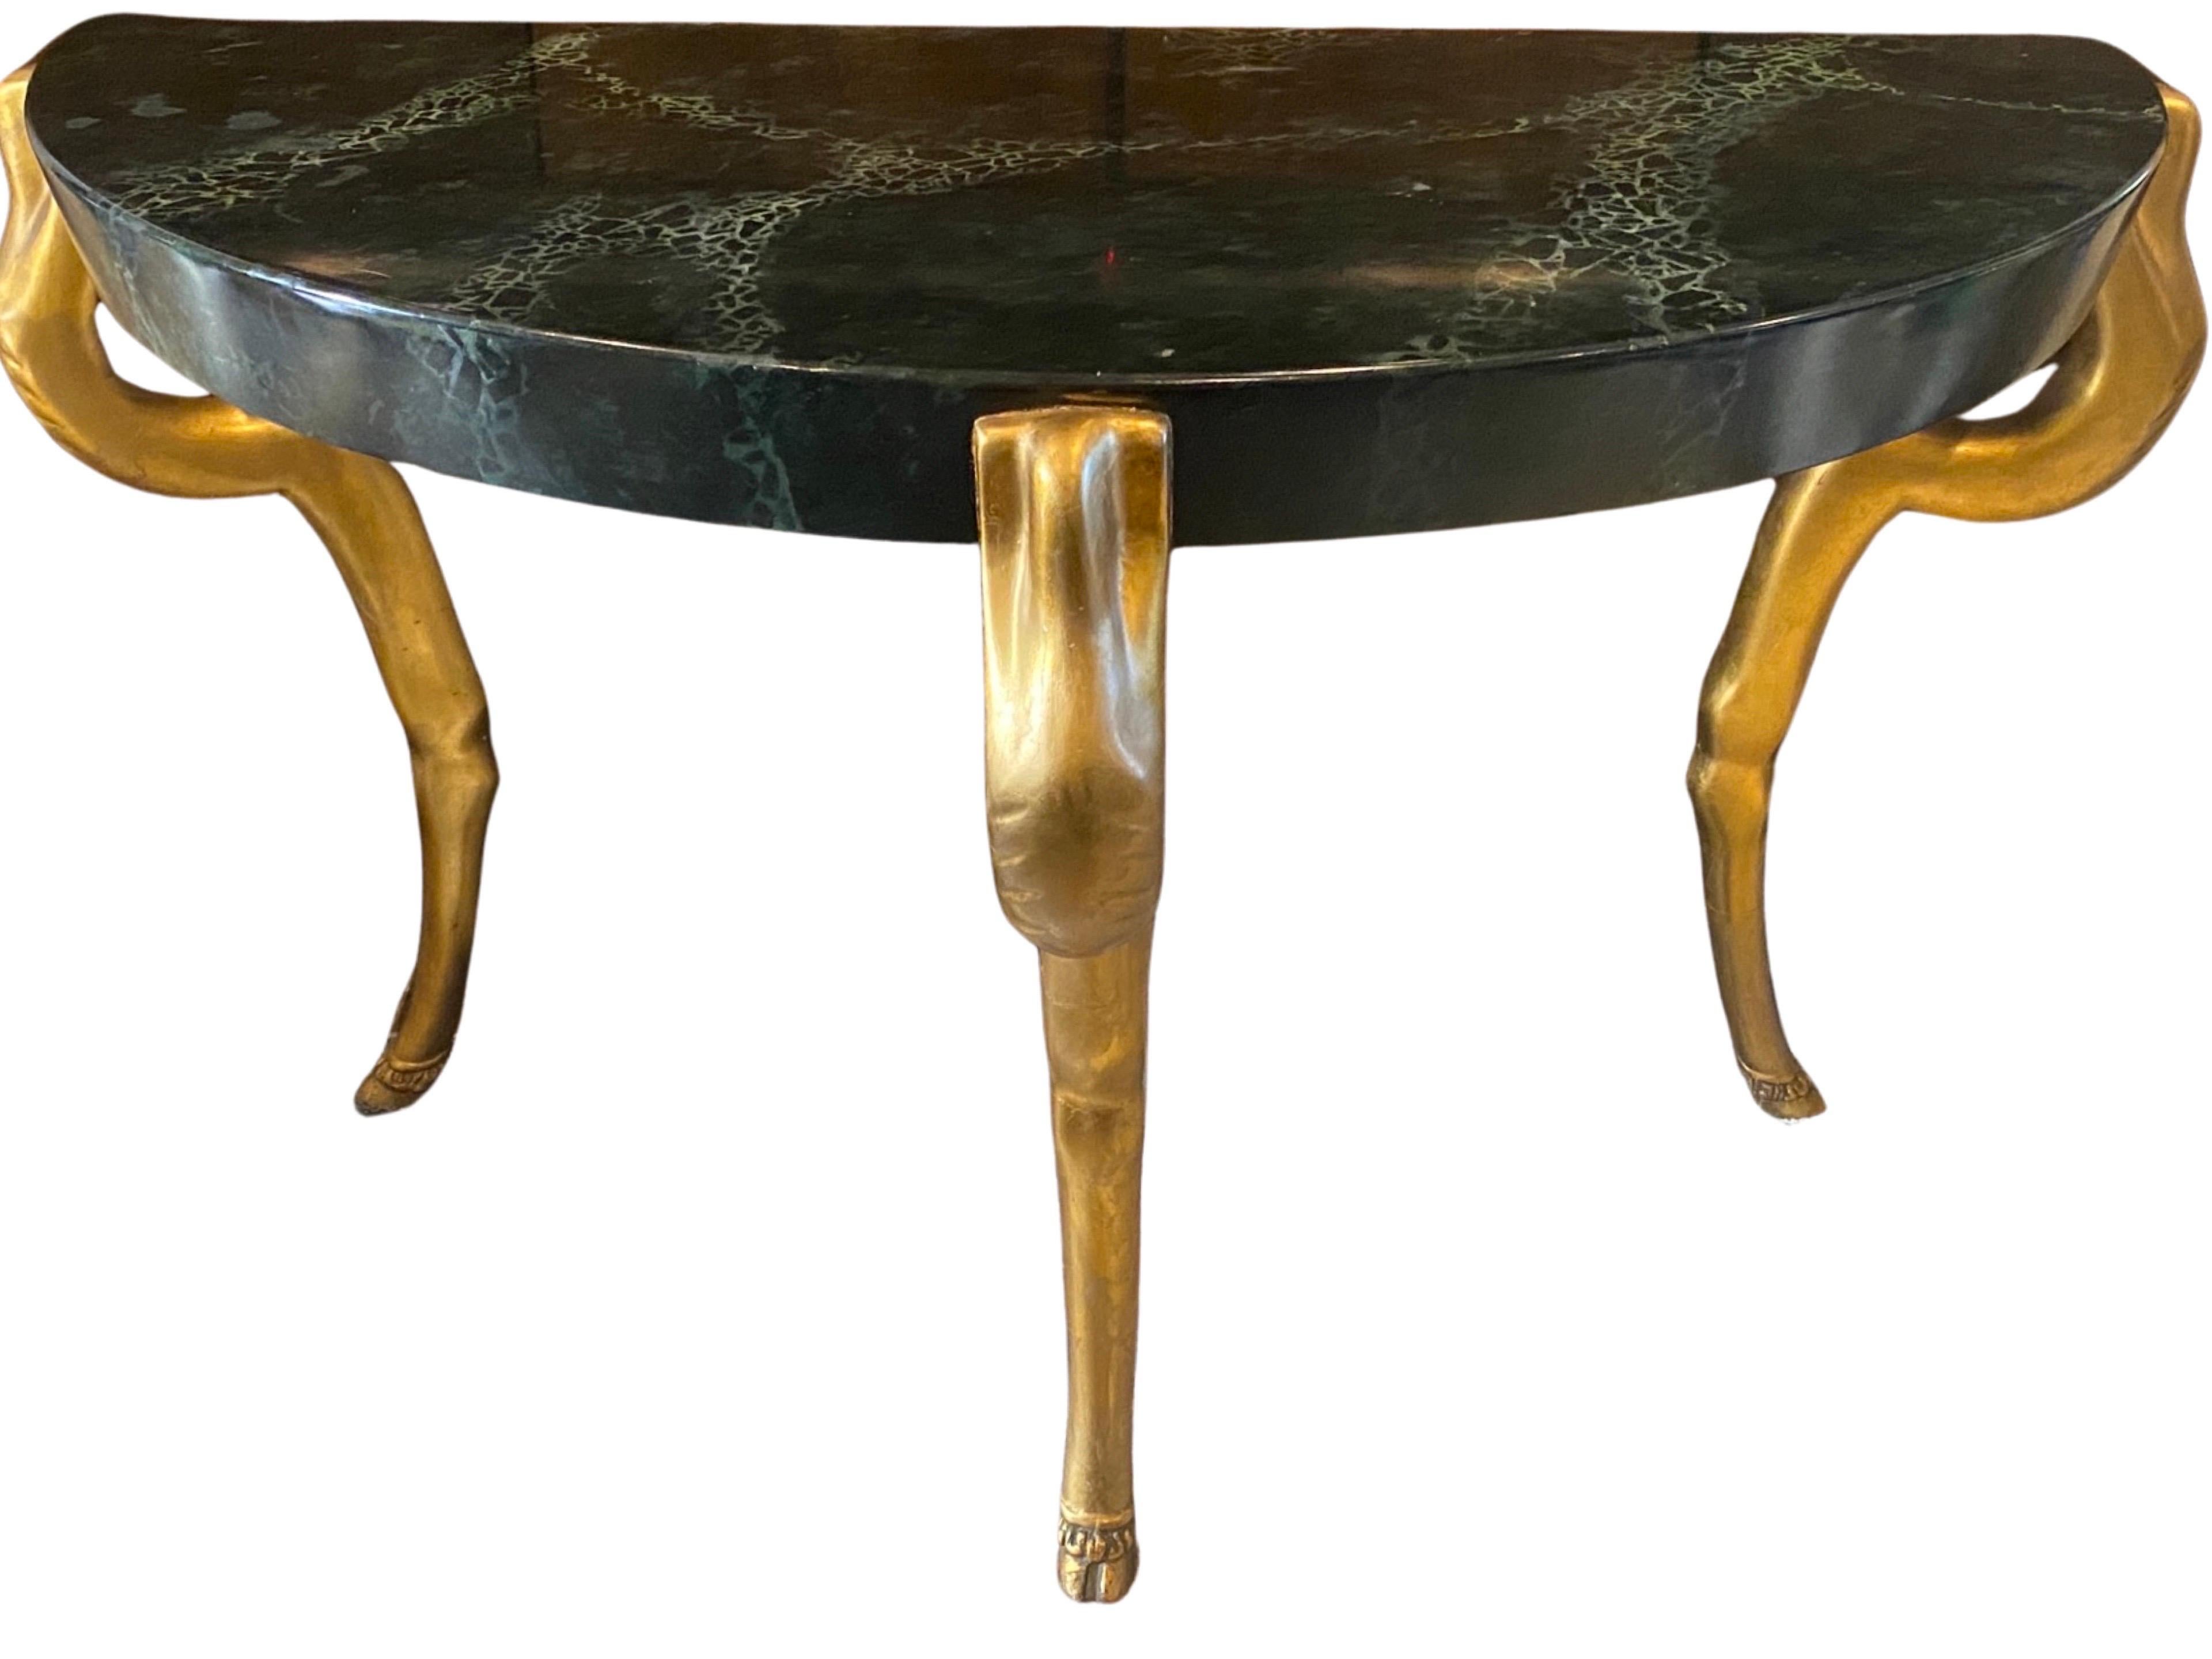 Honored to offer such a beautiful special console available for sale for the first time. This custom original console is from a jaw-dropping vintage Indian Wells (Palm Springs Area) Estate . The Demi-lune shape console has three hand carved legs